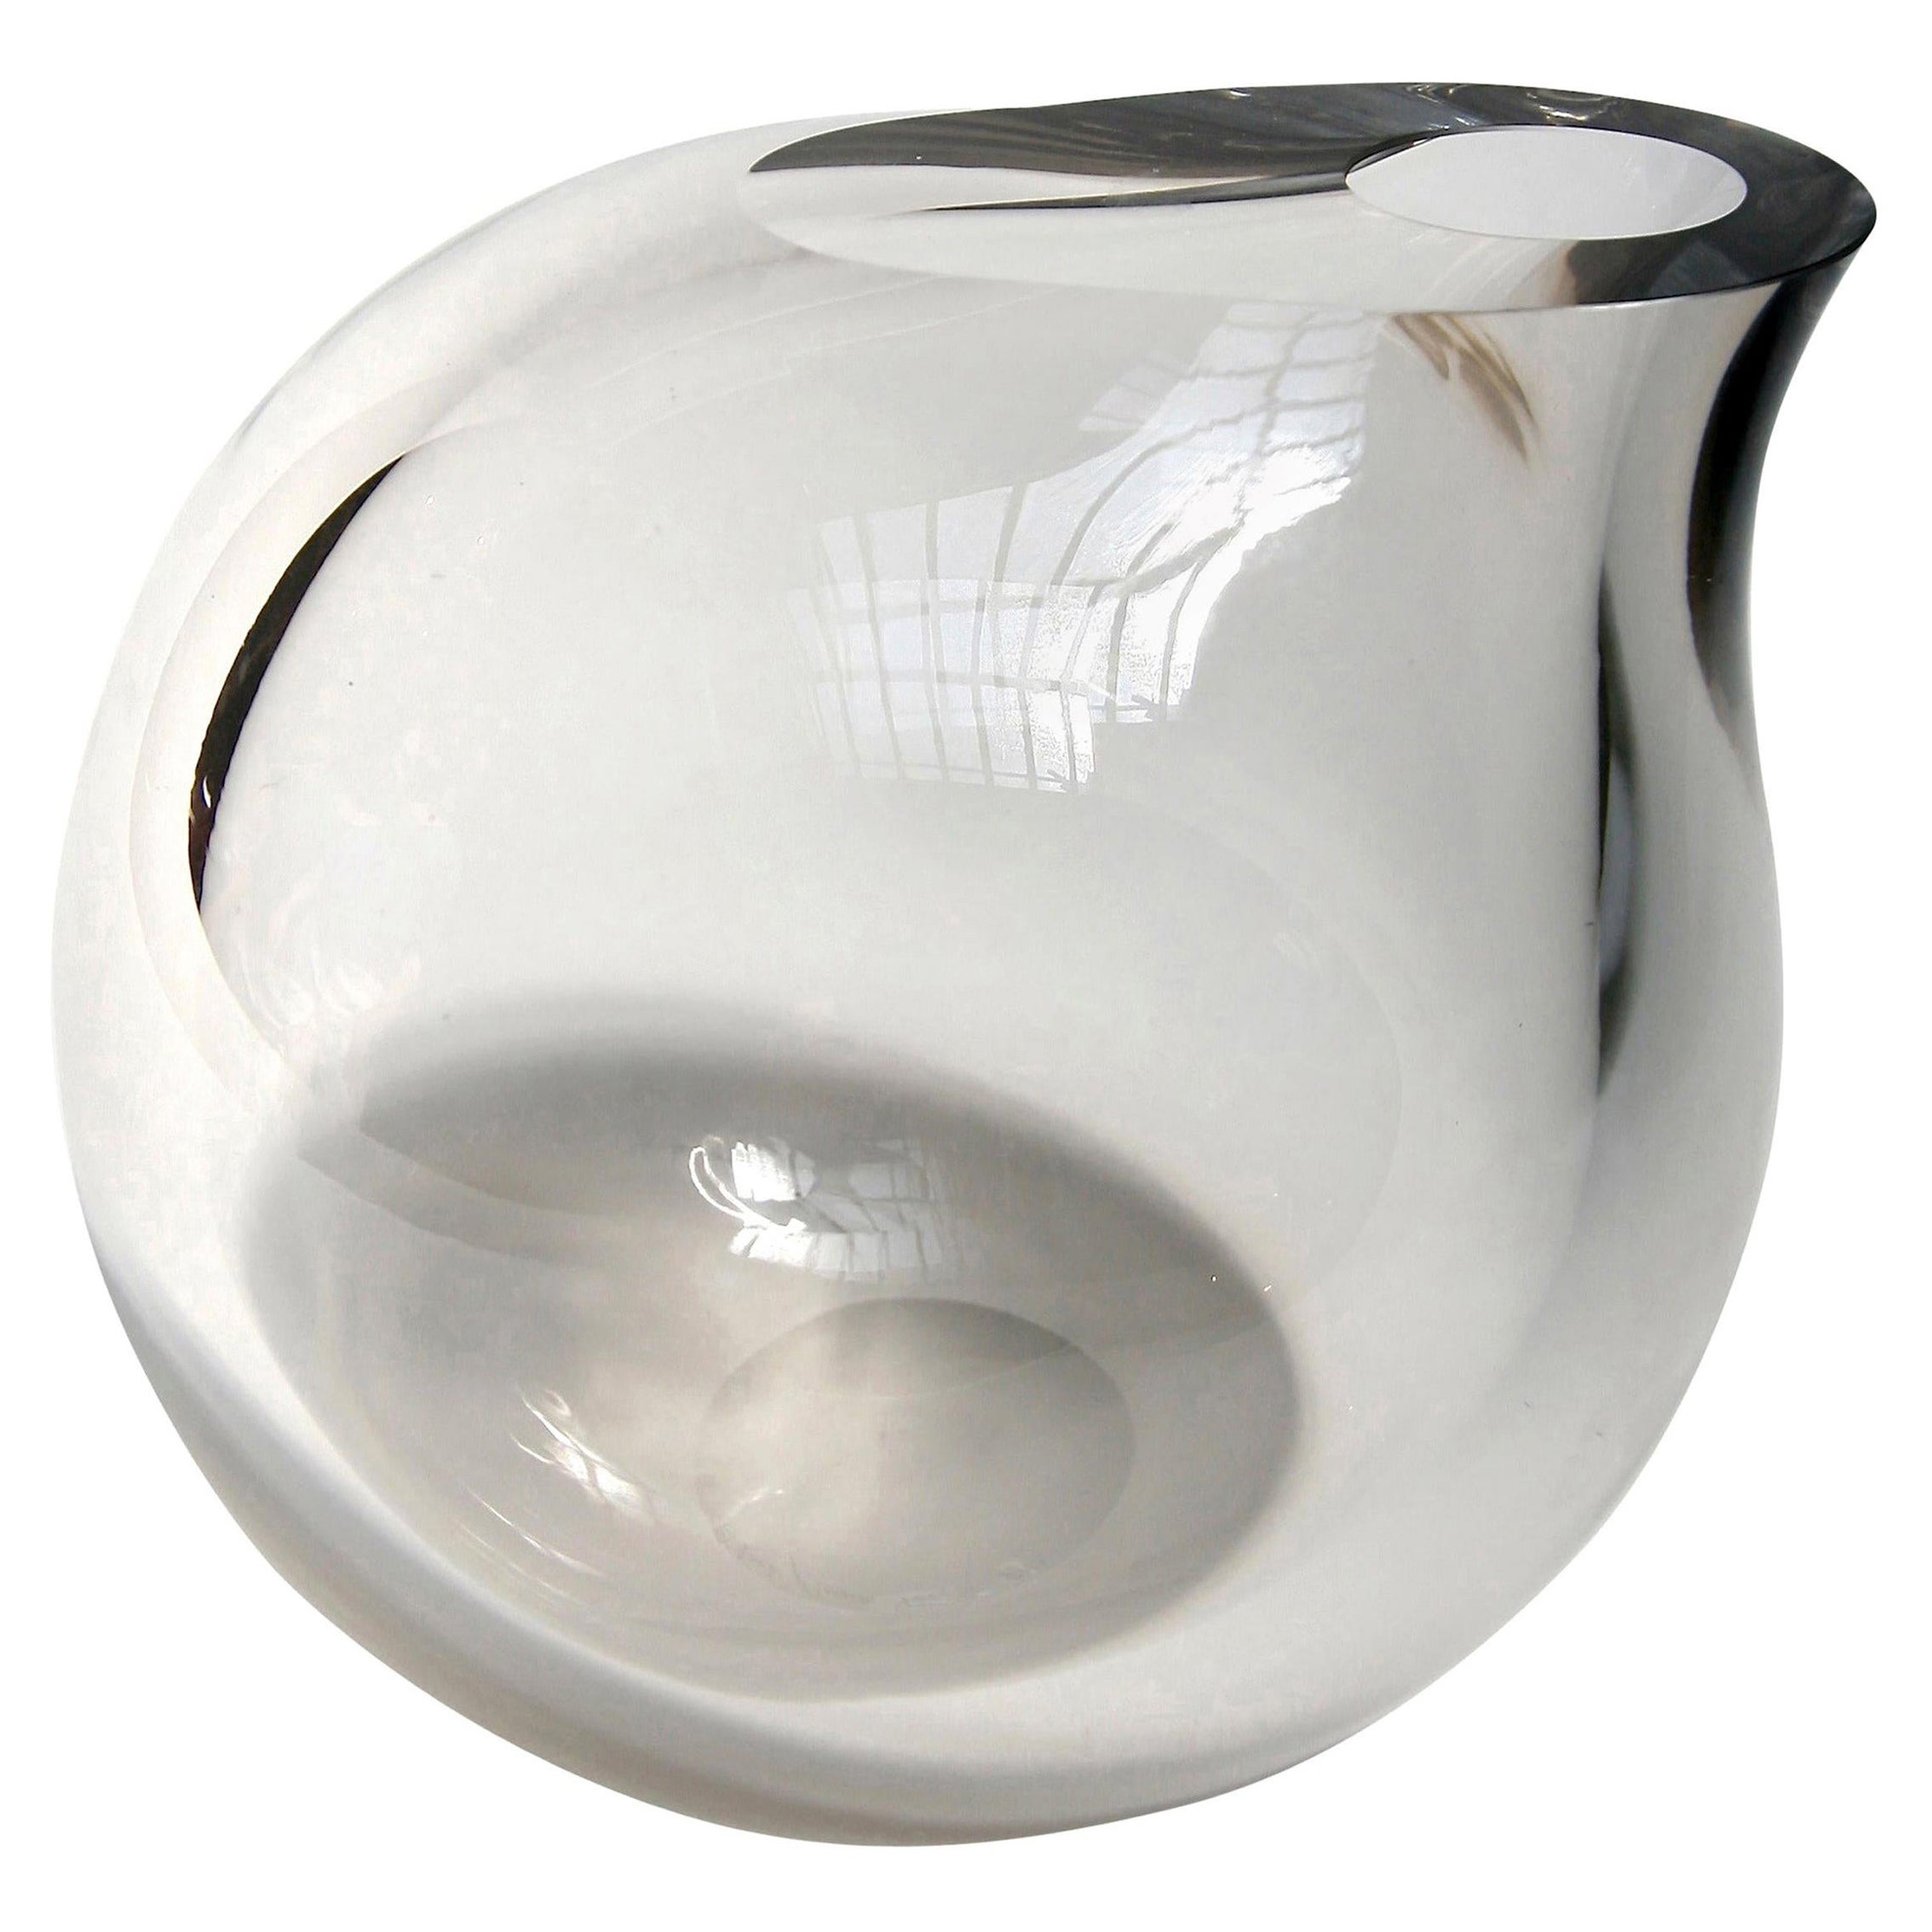 Anna Torfs Small Vaza Glass Vase or Sculpture in Smoke For Sale